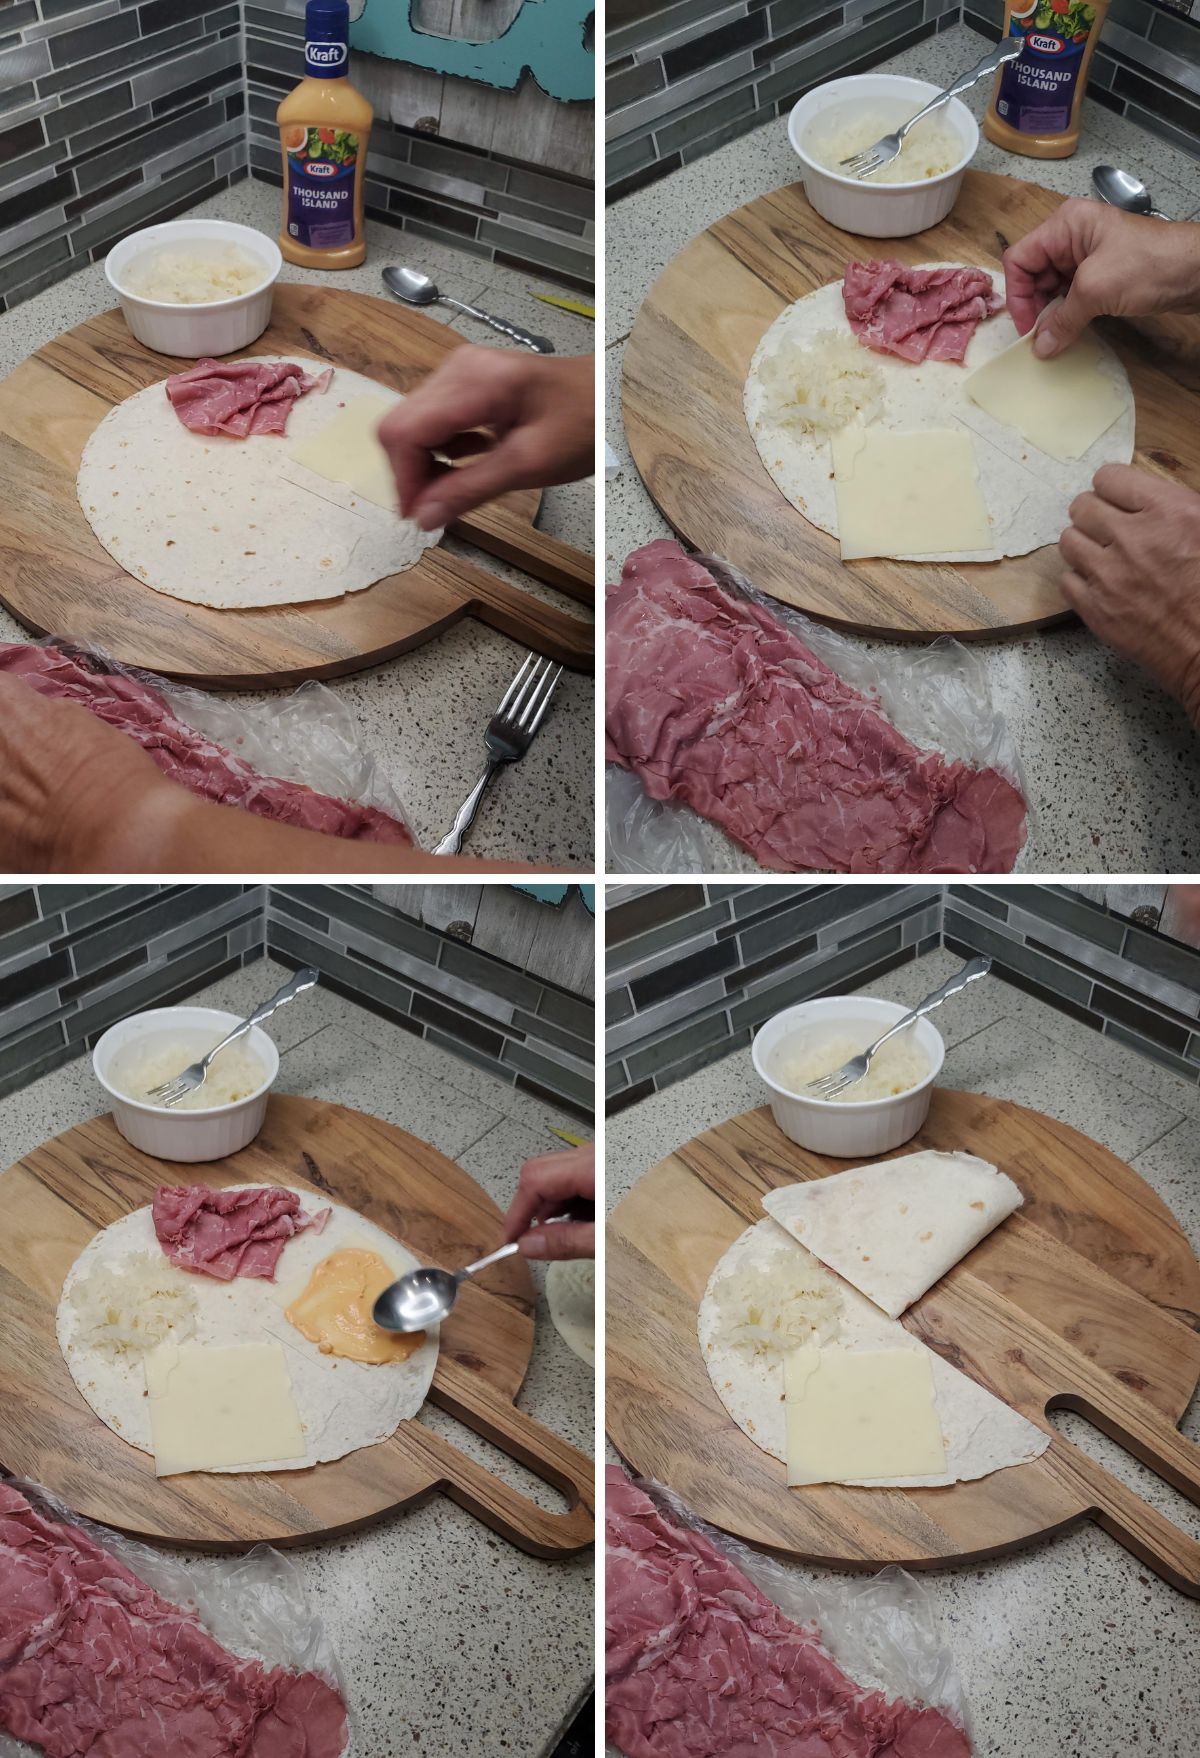 Preparation of a meat and cheese-stuffed tortilla on a kitchen counter.